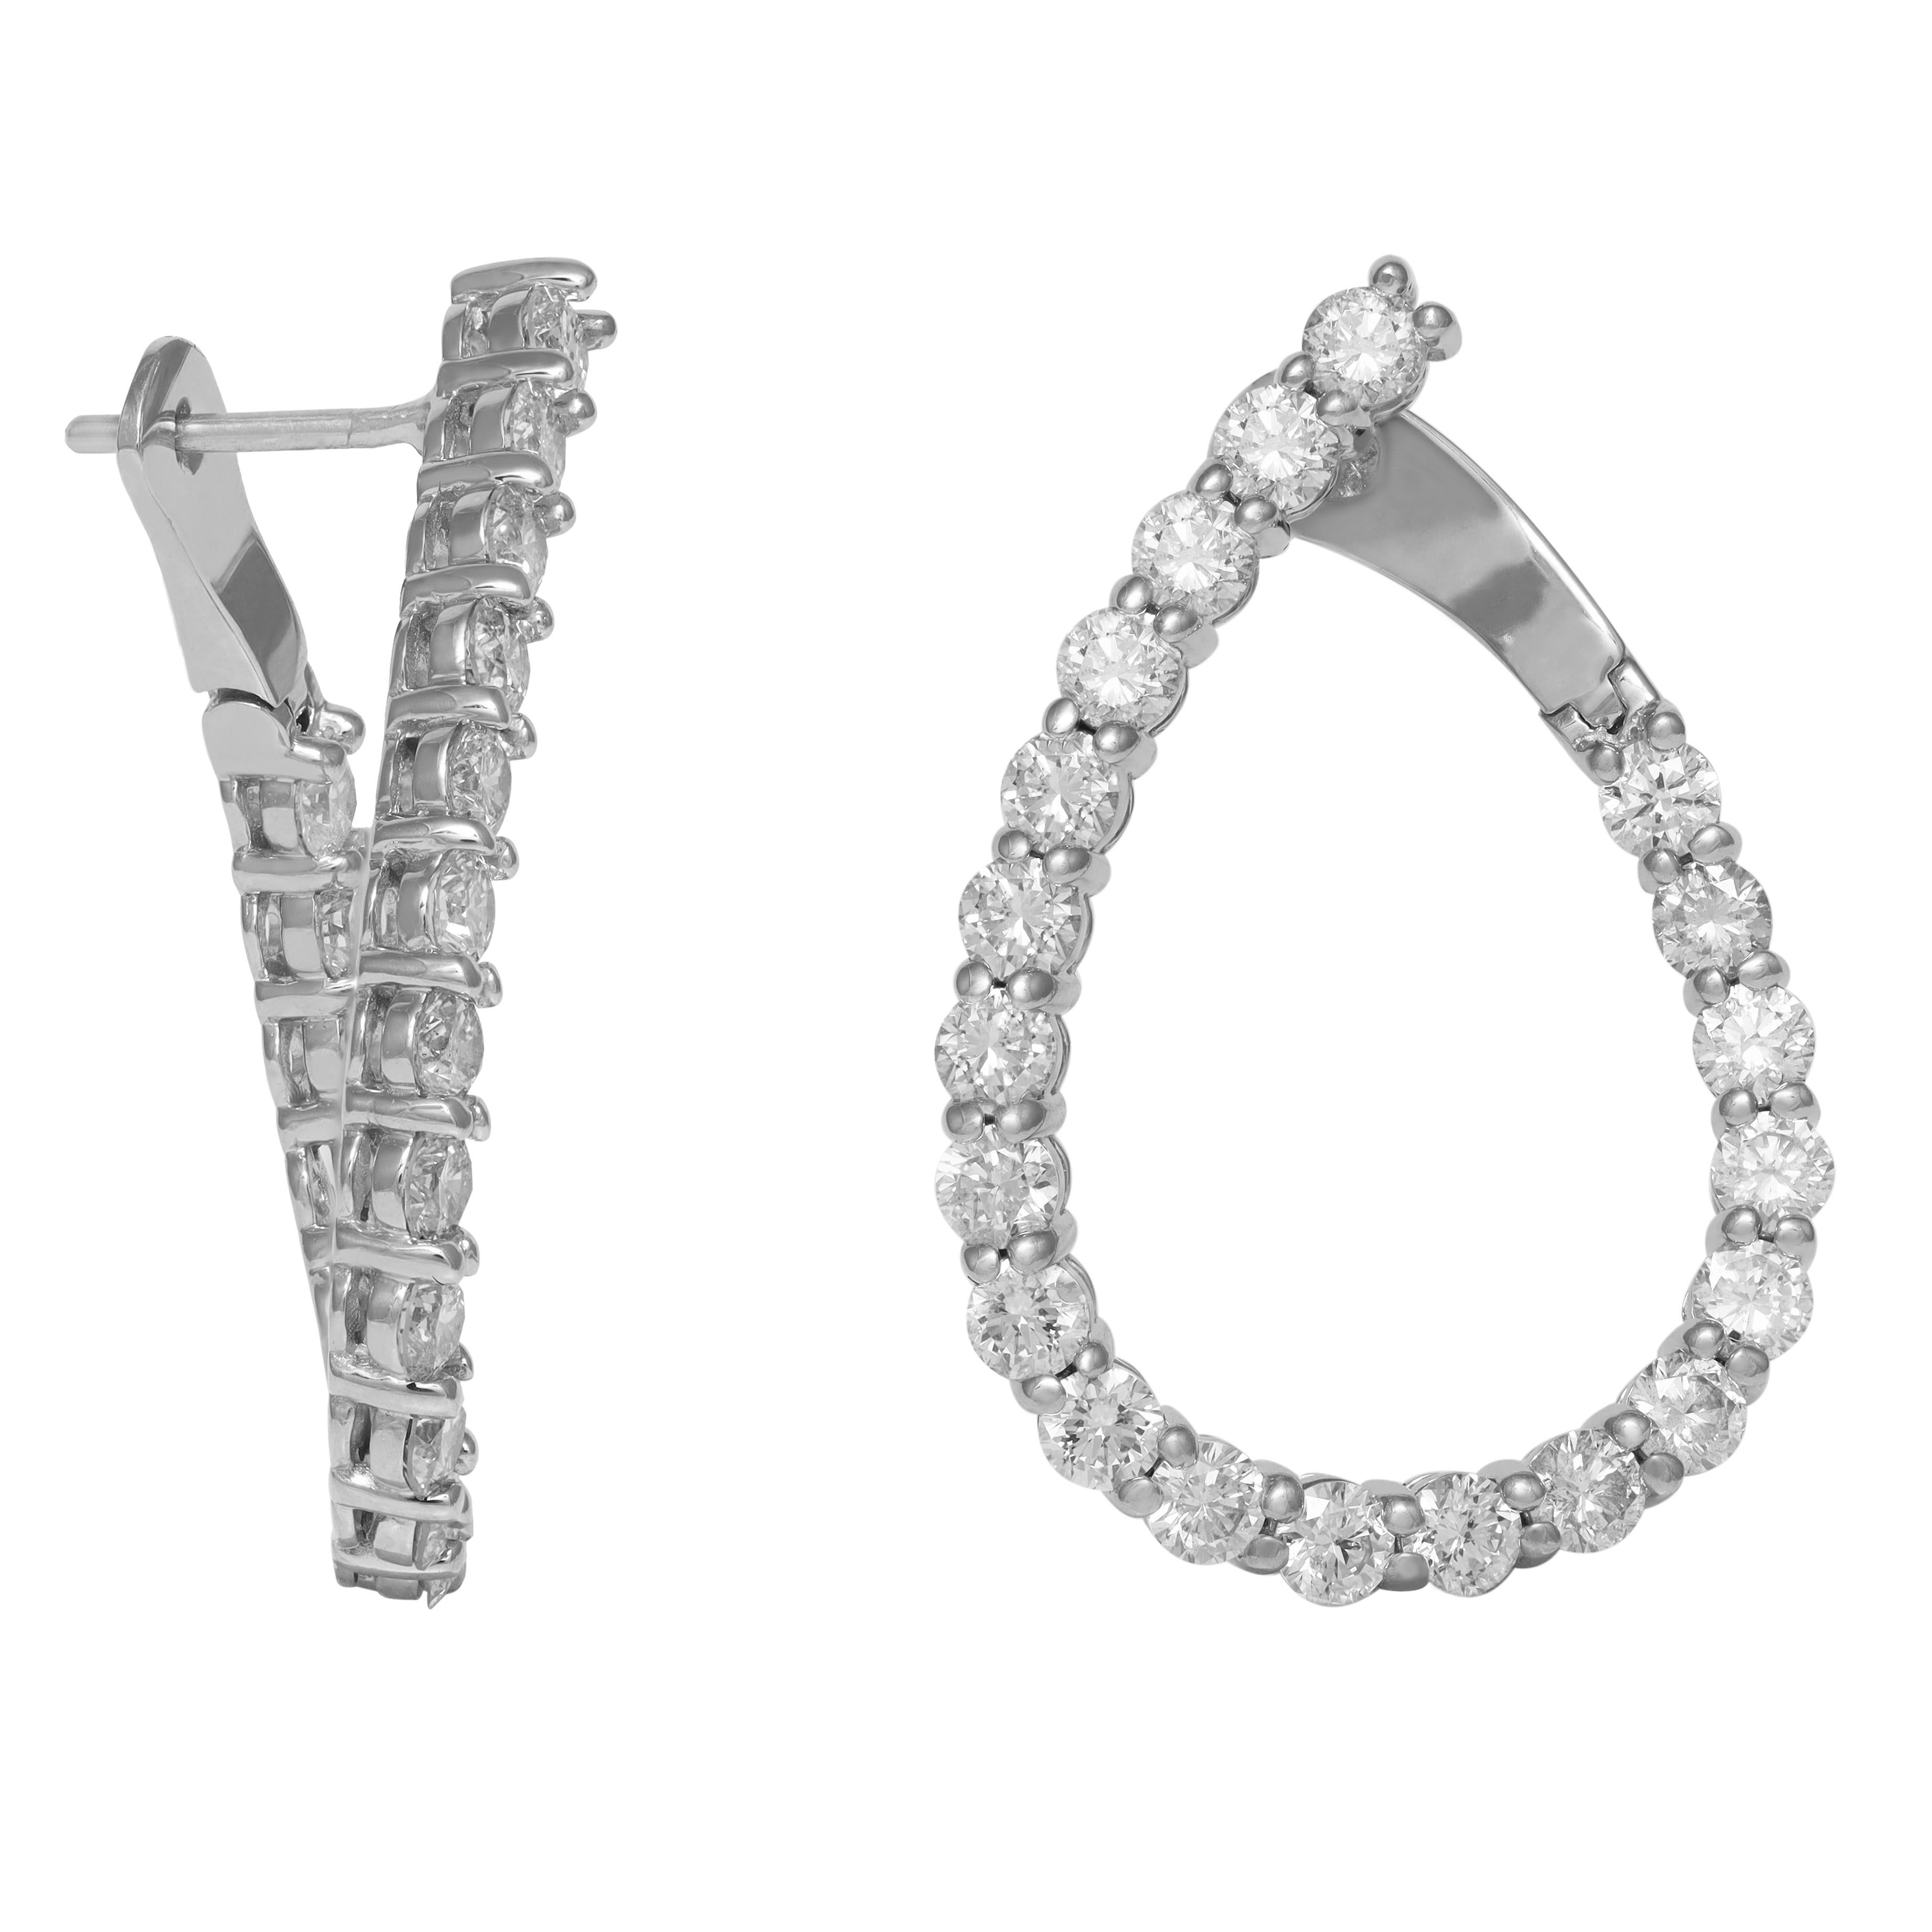 Modern Diana M. 14kt white gold fashion earrings featuring 3.60 cts tw of round diamond For Sale